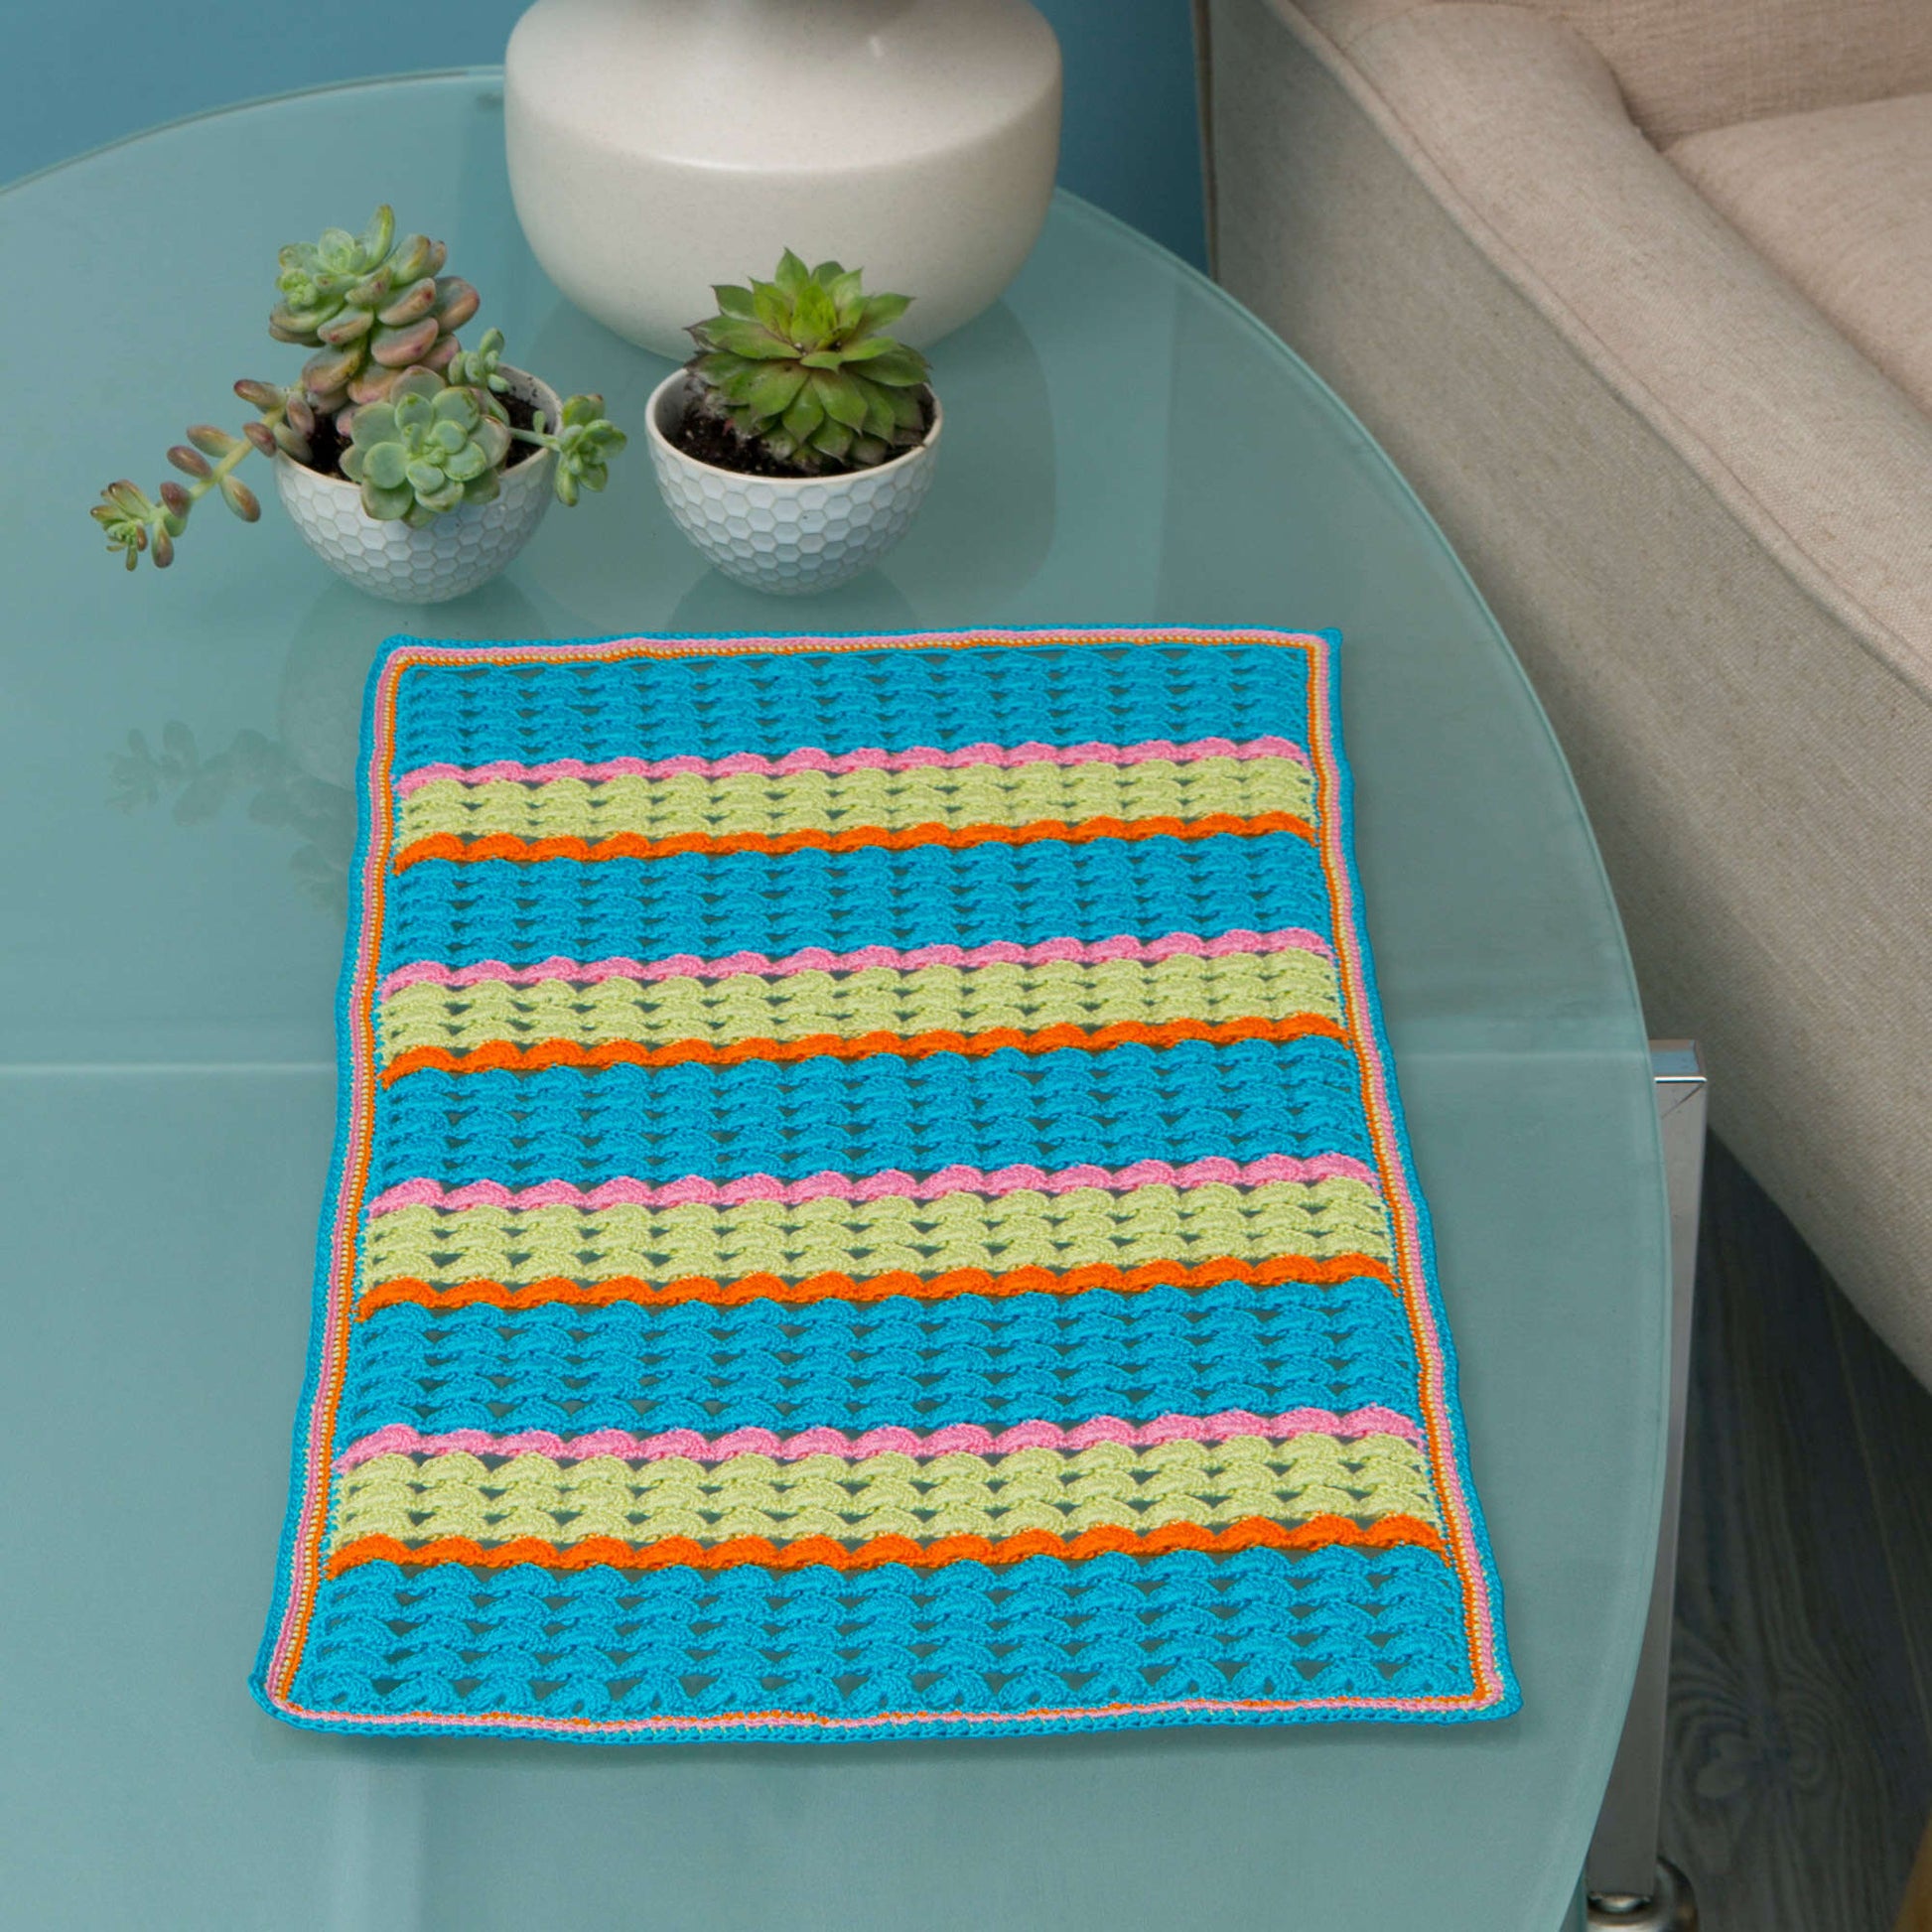 Free Aunt Lydia's Crochet Colorful Table Doily Pattern